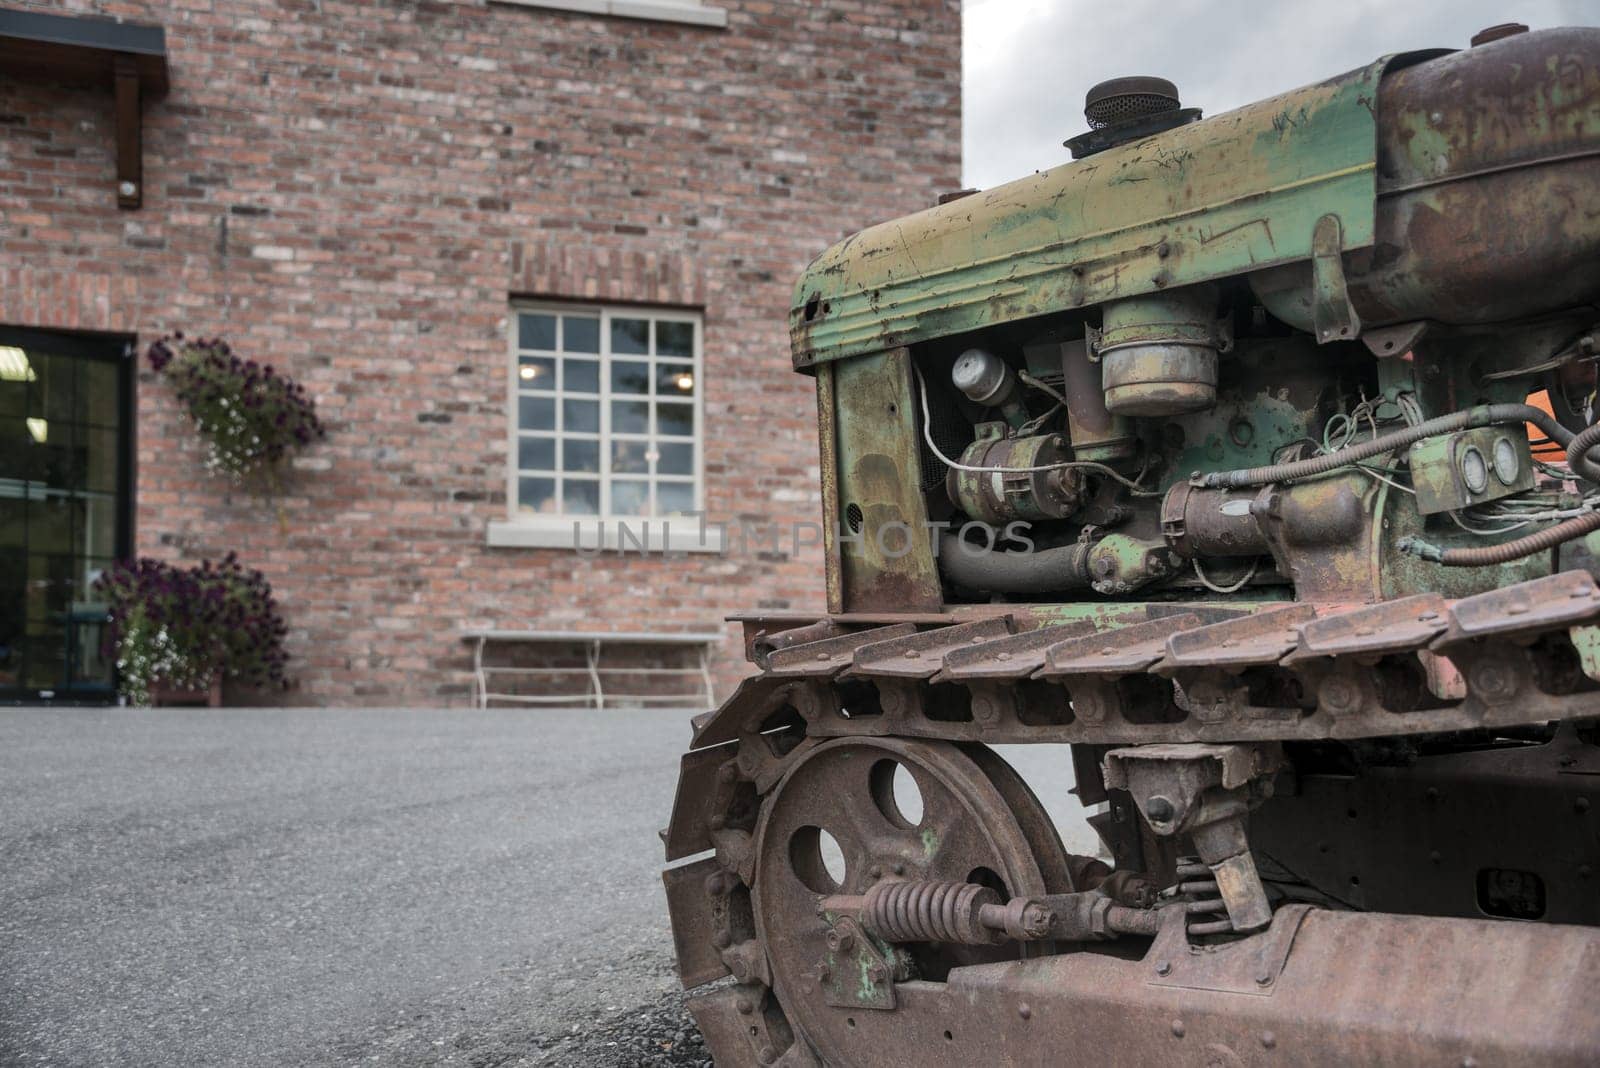 Old rasty tracked tractor in front of brick building by Imagenet